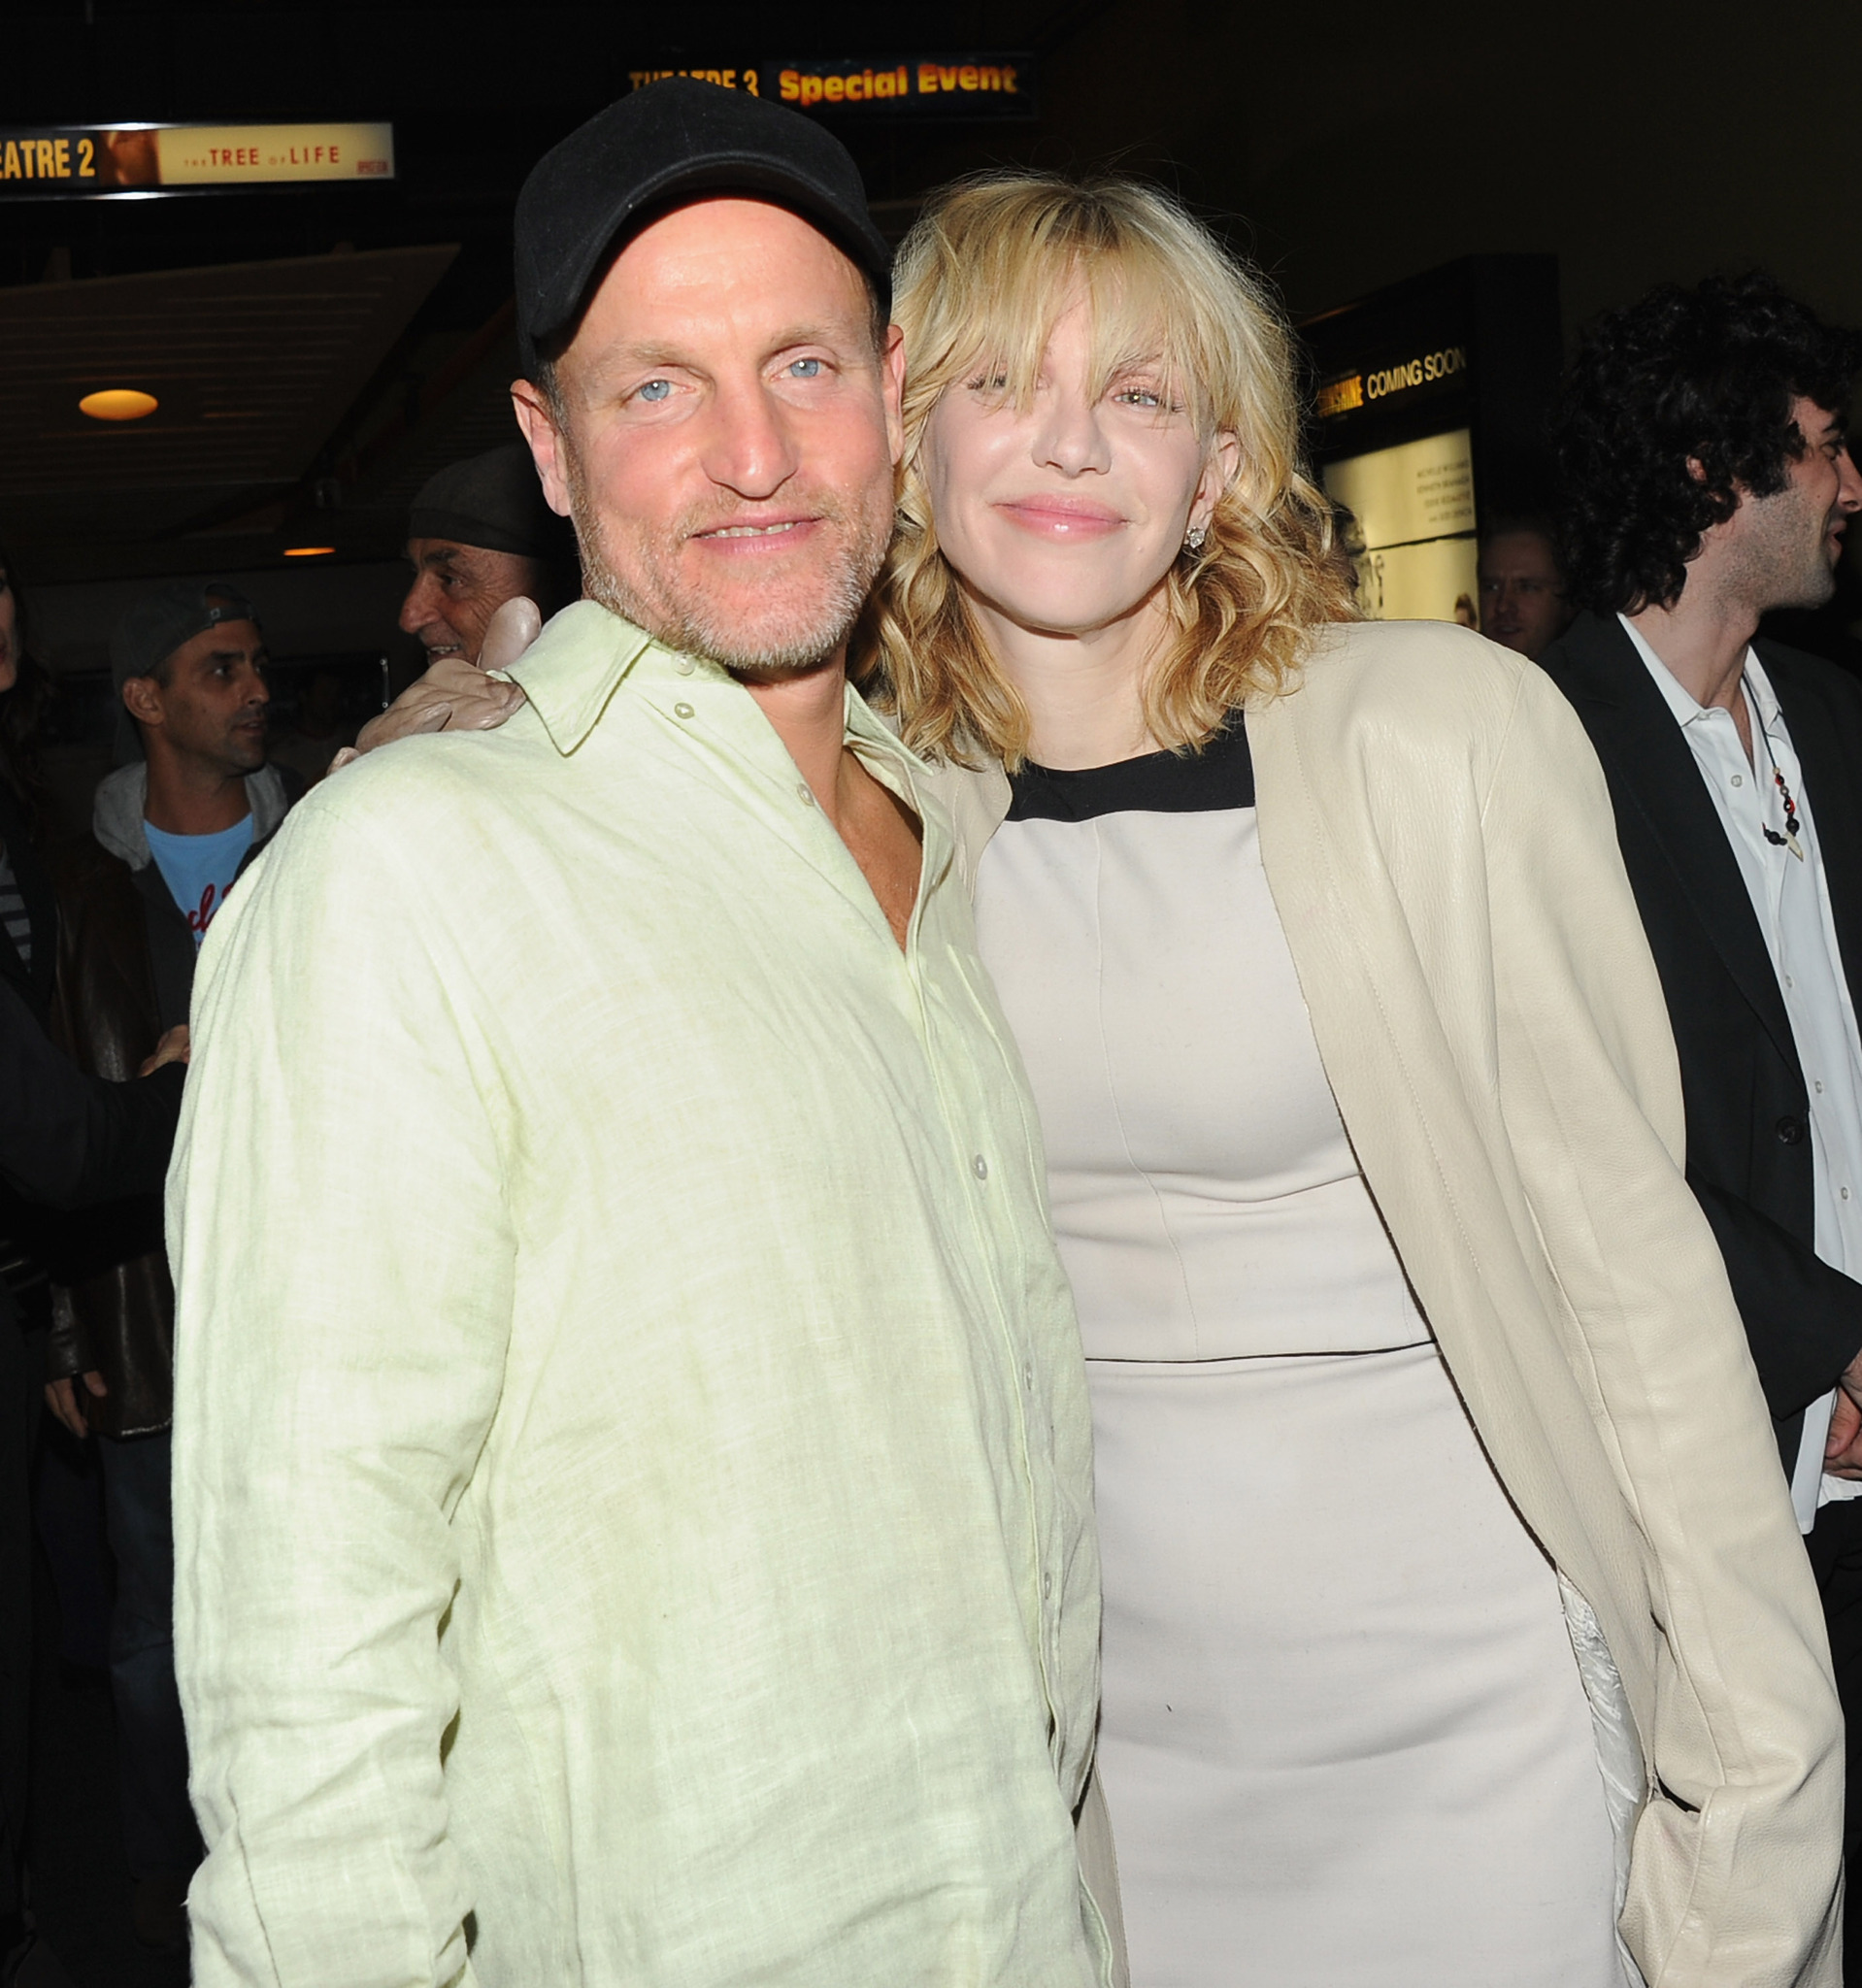 Woody Harrelson and Courtney Love at event of Rampart (2011)